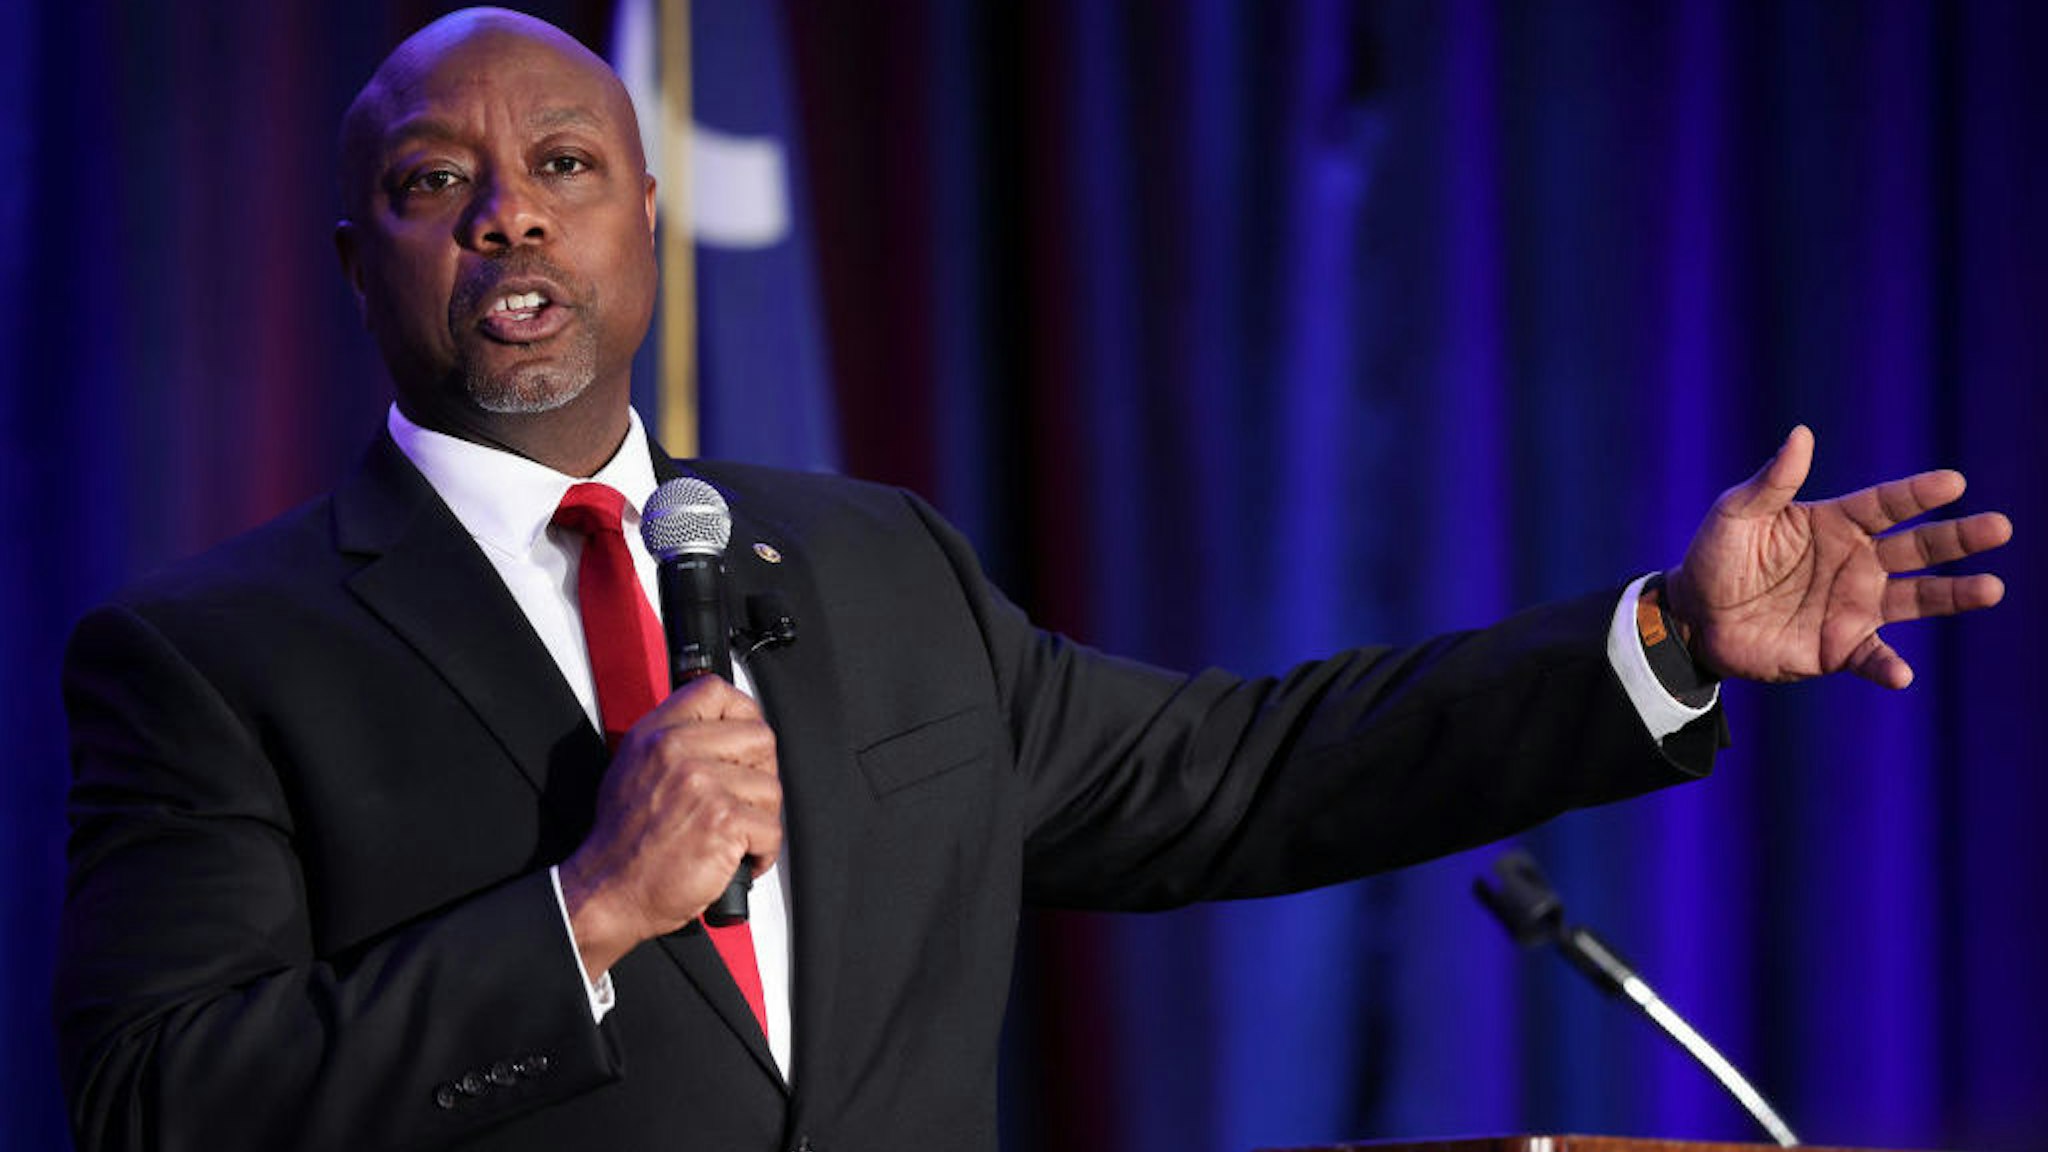 CHARLESTON, SOUTH CAROLINA - FEBRUARY 16: Sen. Tim Scott (R-SC) delivers remarks at the Charleston County Republican Party’s Black History Month Banquet February 16, 2023 in Charleston, South Carolina. Scott spoke about growing up in South Carolina during his remarks. (Photo by Win McNamee/Getty Images)